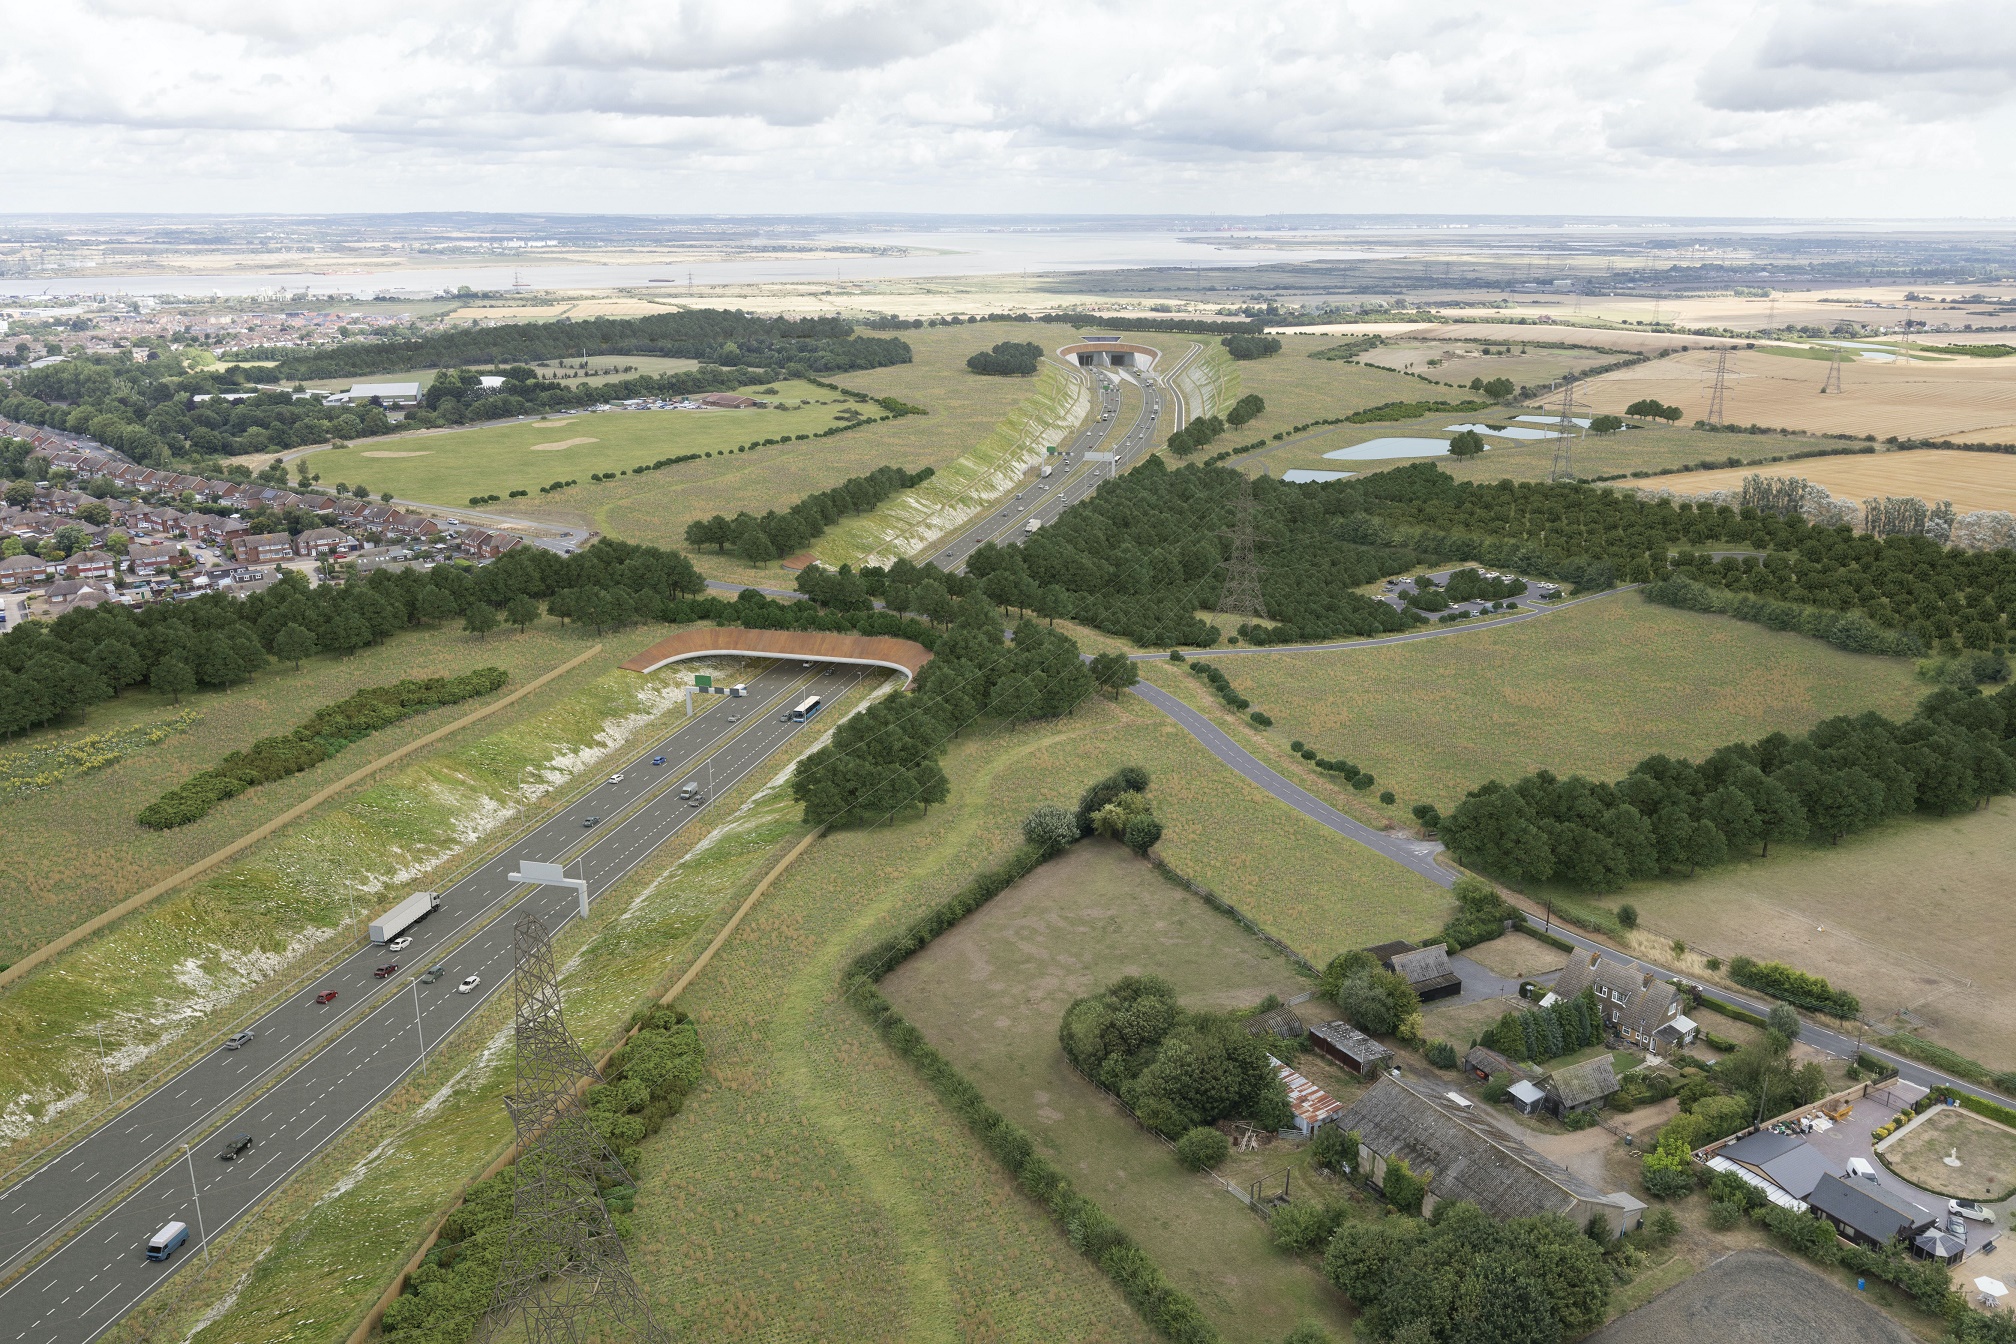 Artist’s impression of the Lower Thames Crossing’s northern tunnel entrance in the county of Essex, looking south (image: Highways England)